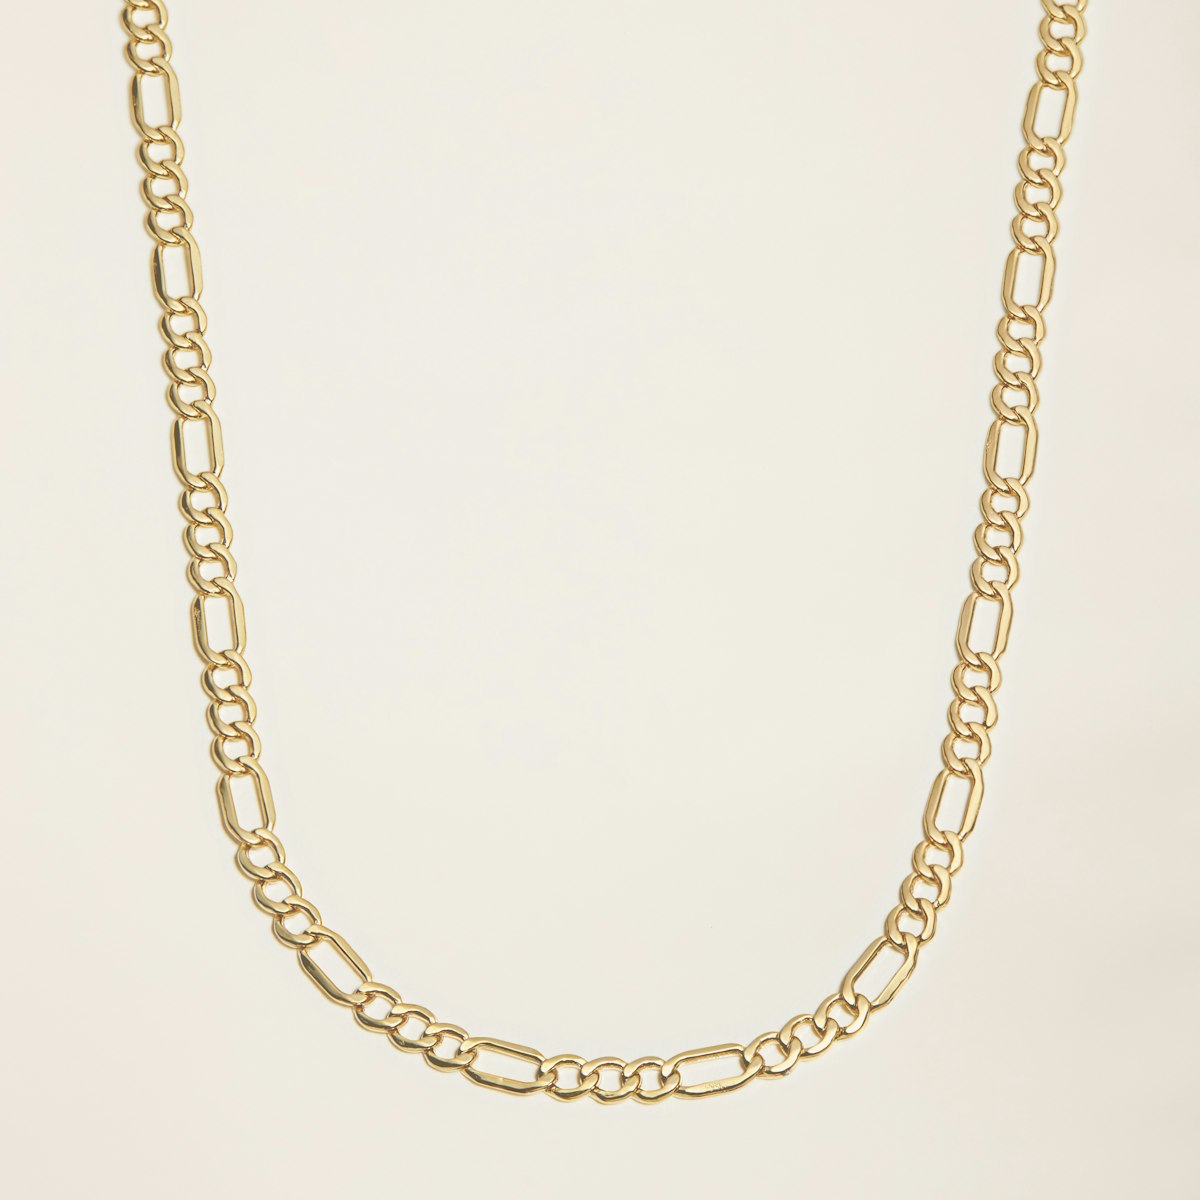 14k Solid Gold Figaro Chain Necklace